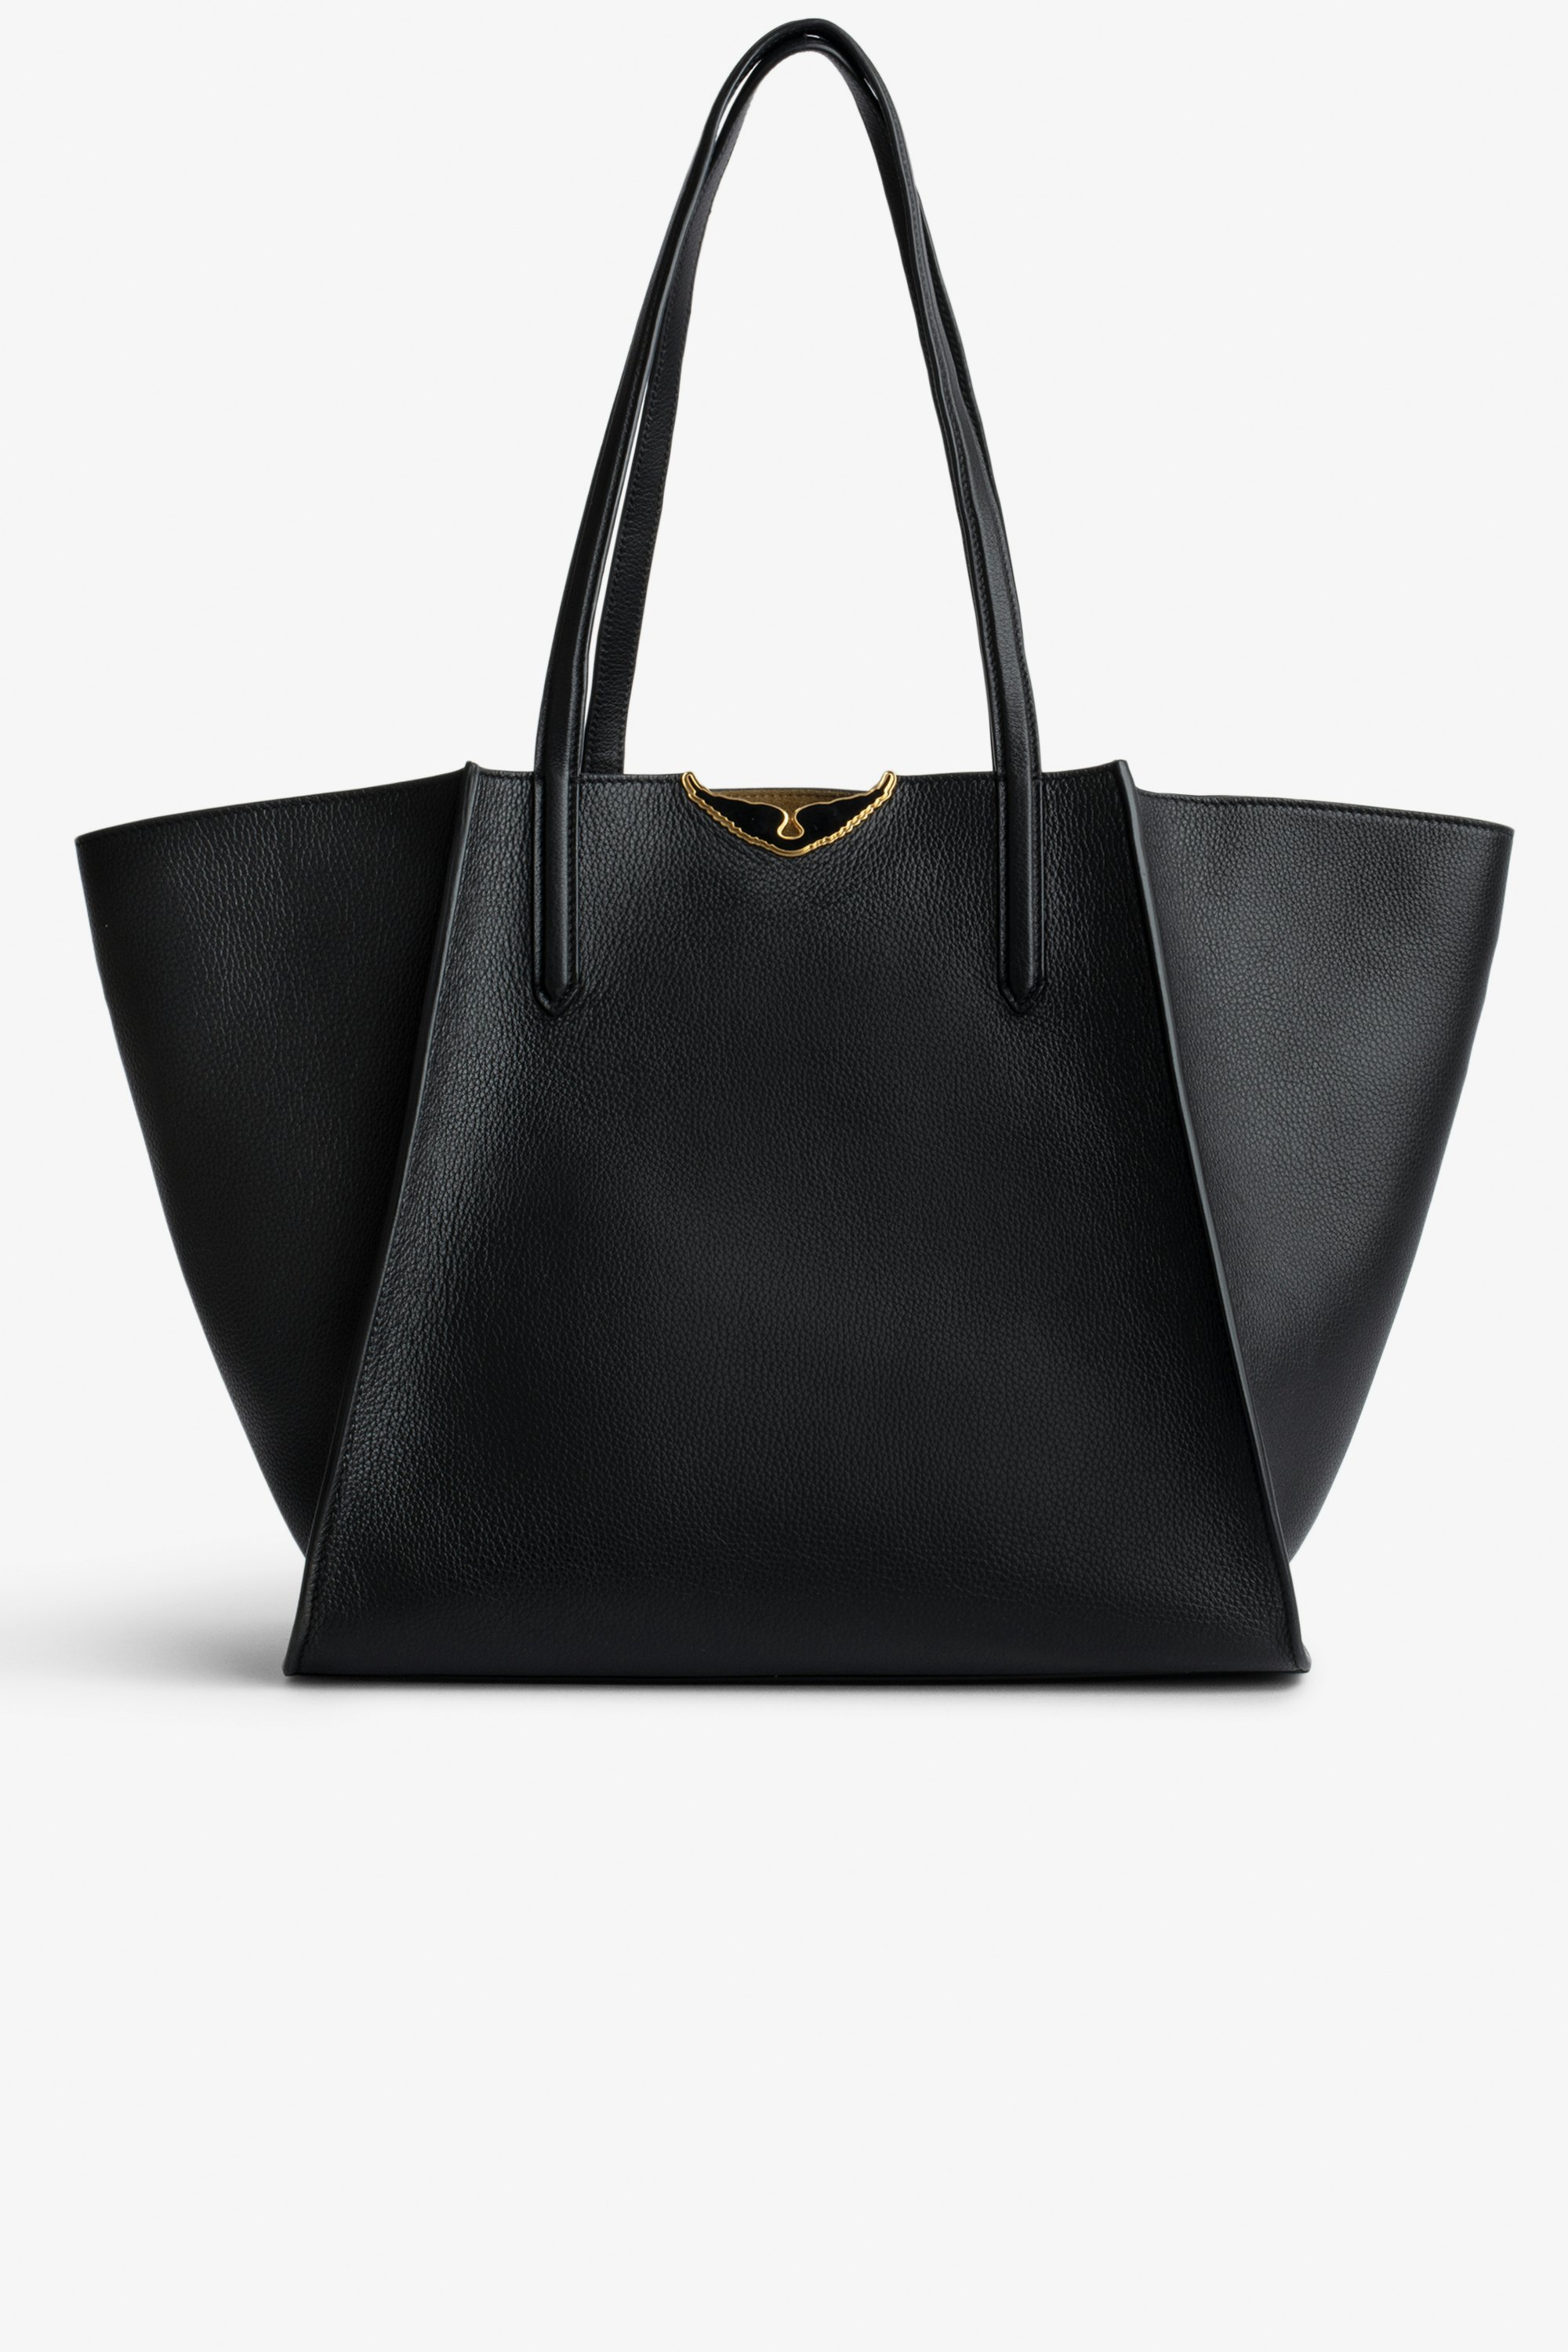 Le Borderline Bag - Women's tote bag in black grained leather and khaki suede with black lacquered wings.